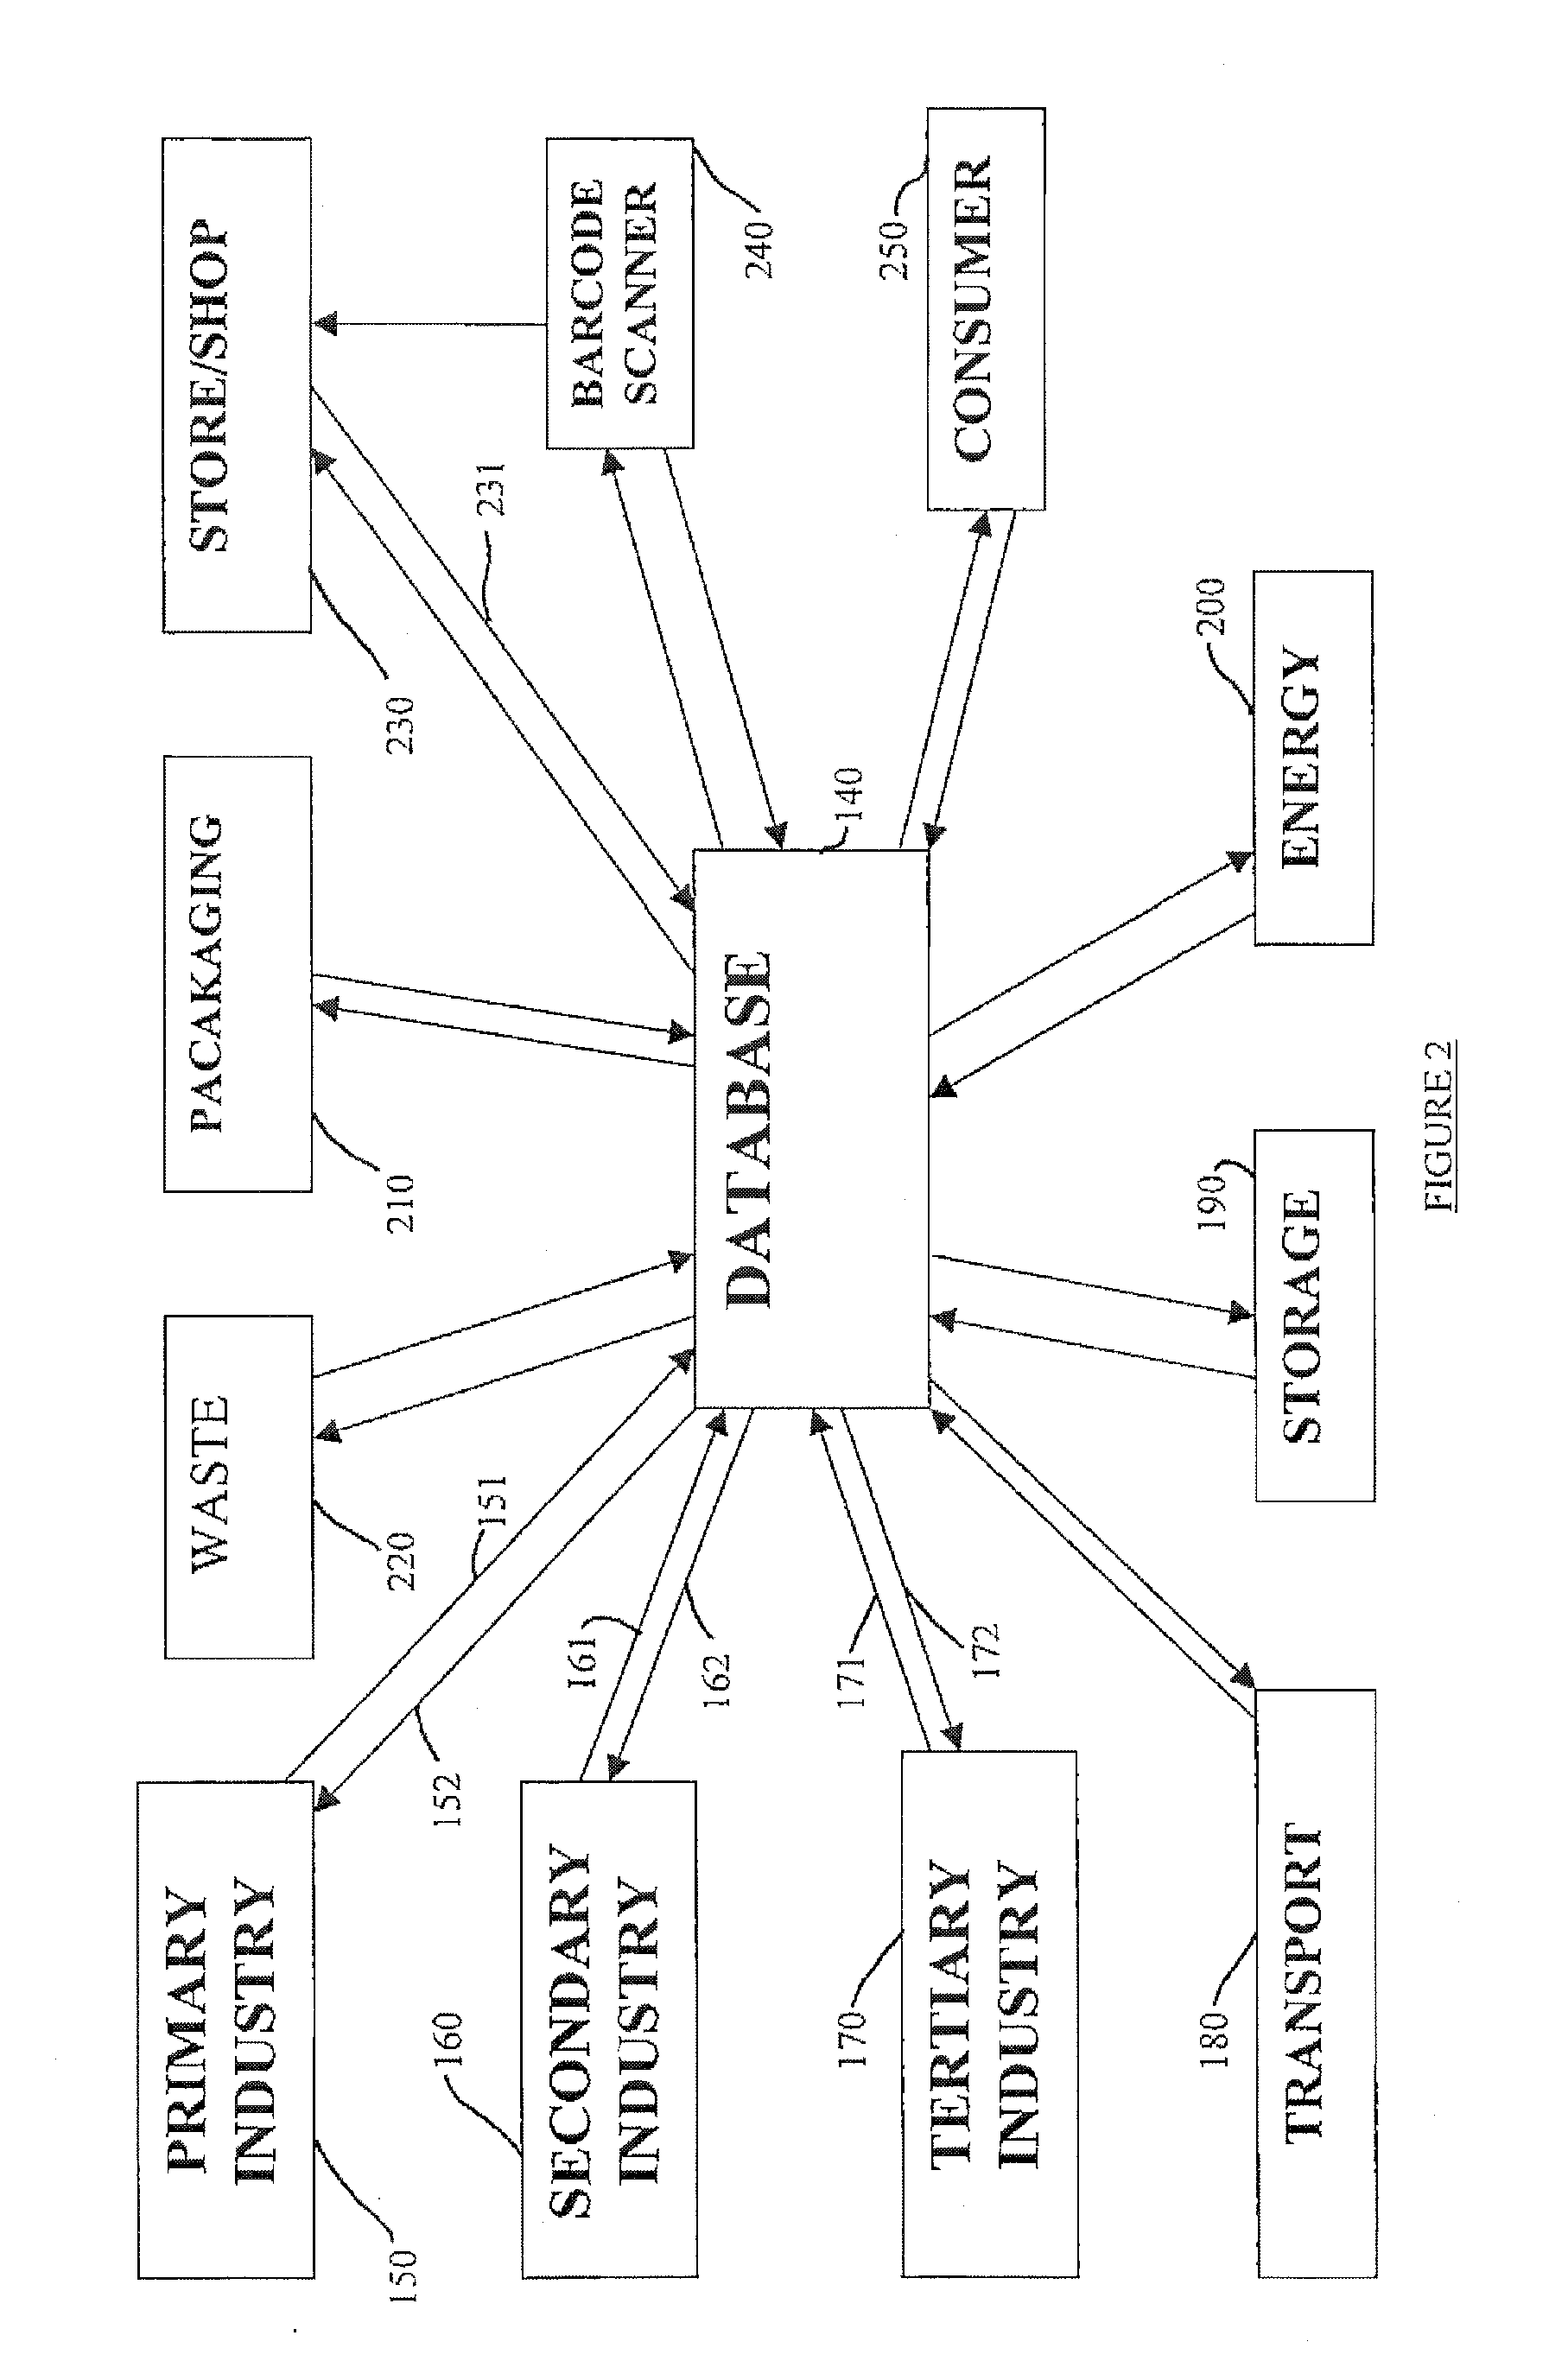 Methods and system for collecting, storing and distributing information relating to goods and/or services